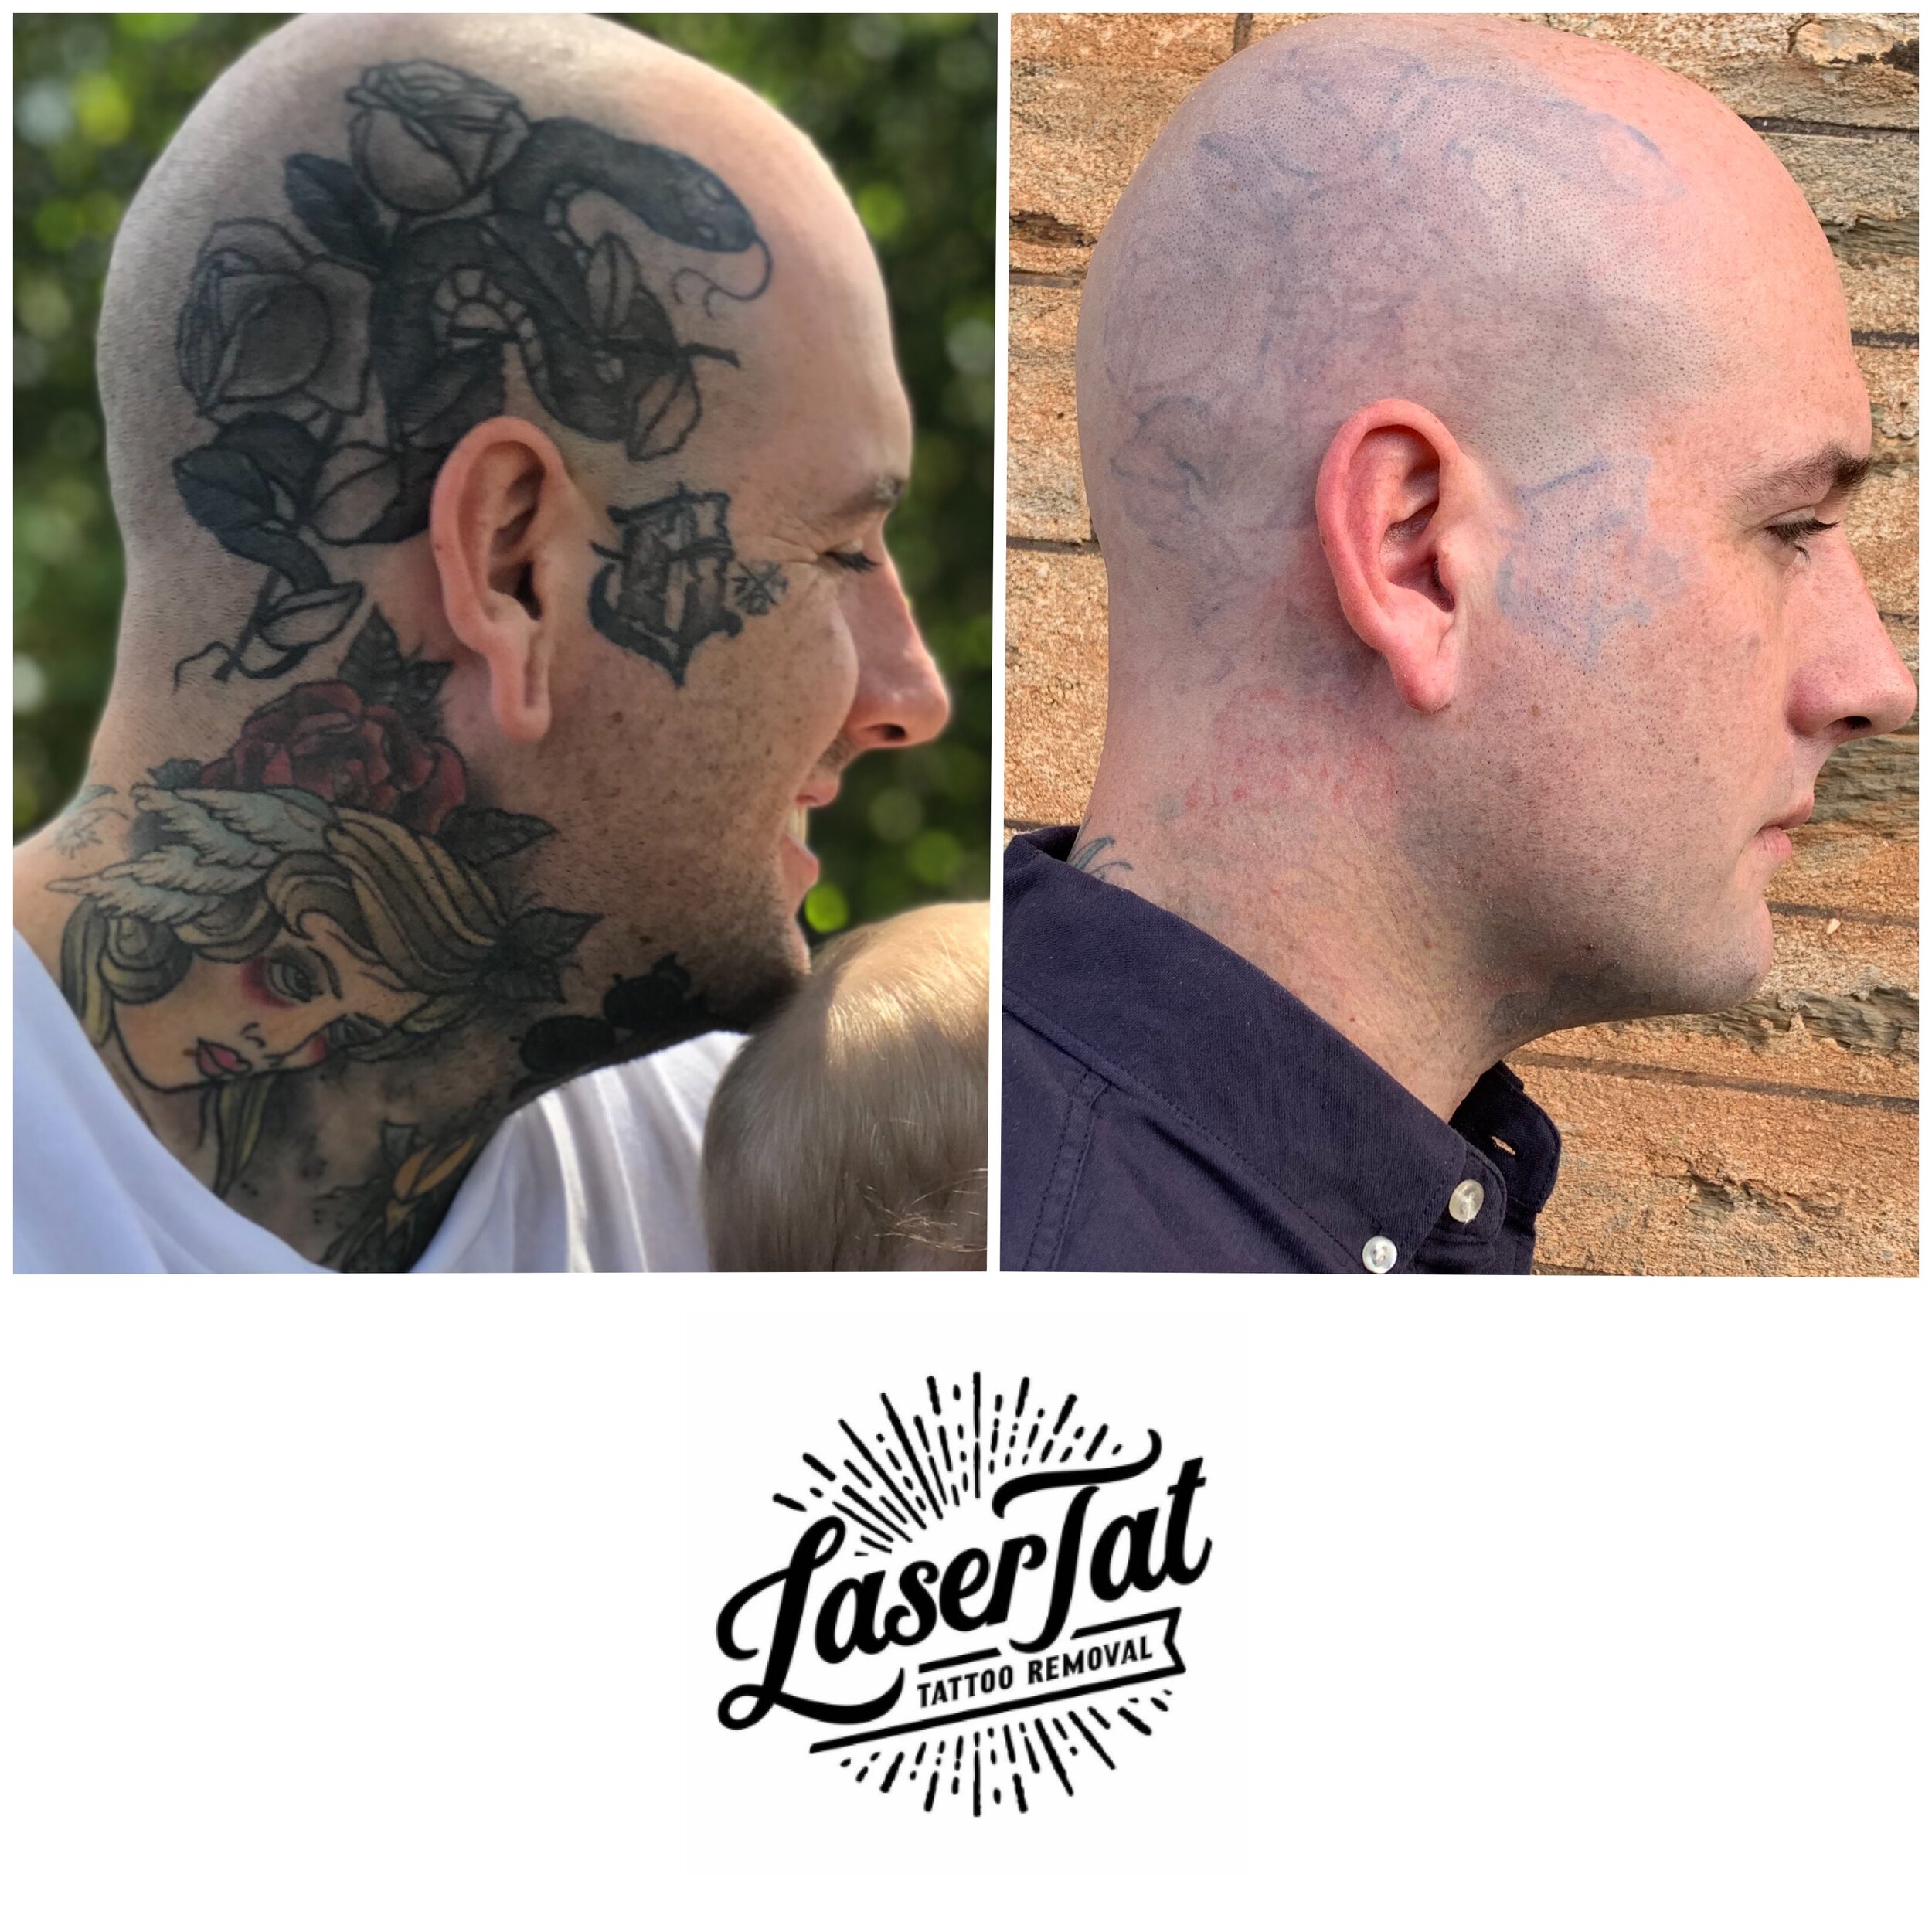 Curt's Journey – Life changing laser tattoo removal — LaserTat